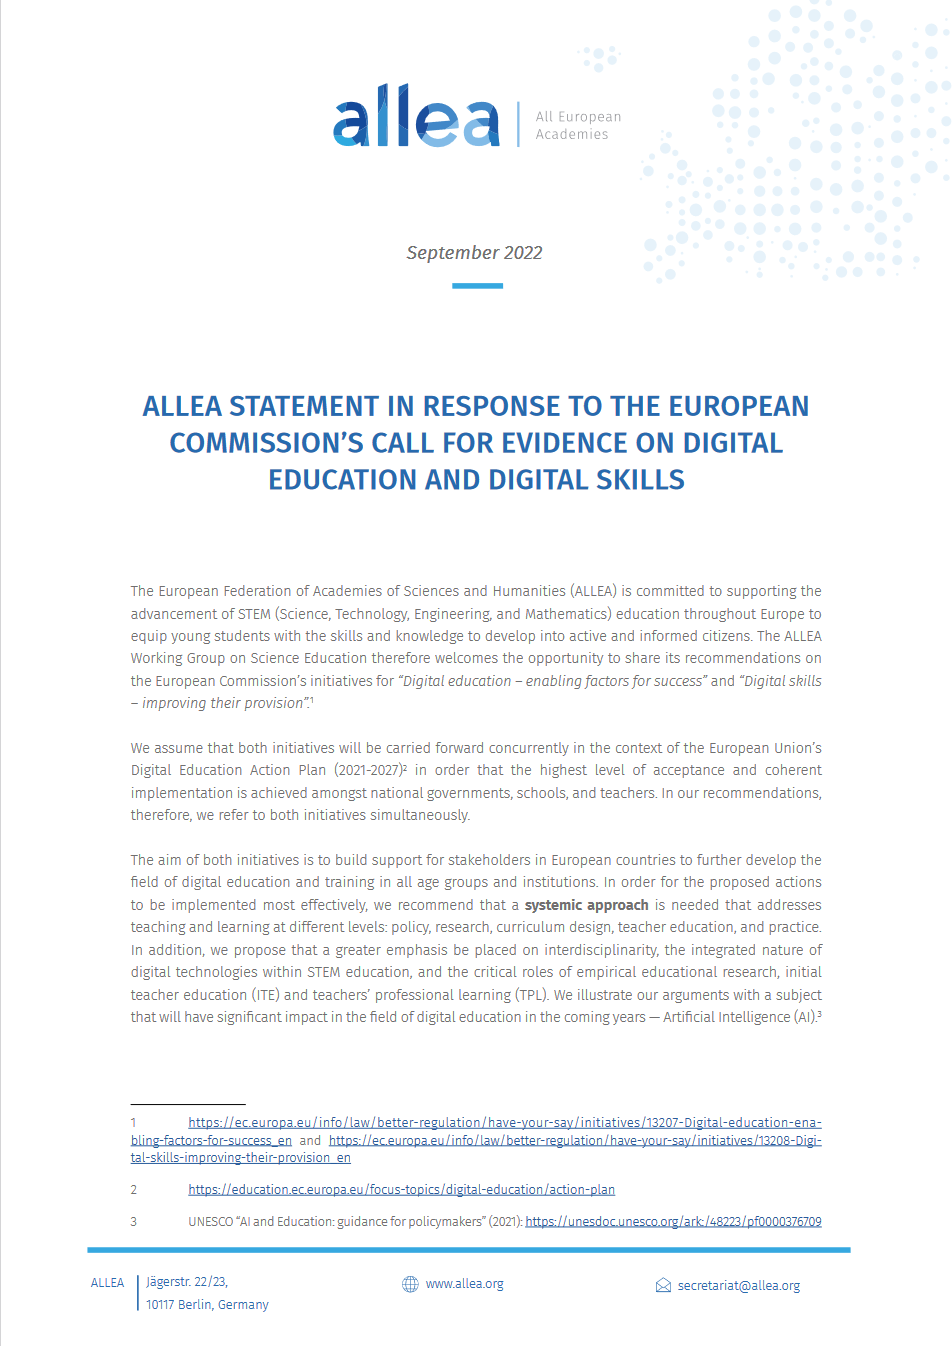 ALLEA Statement in Response to the European Commission’s Call for Evidence on Digital Education and Digital Skills